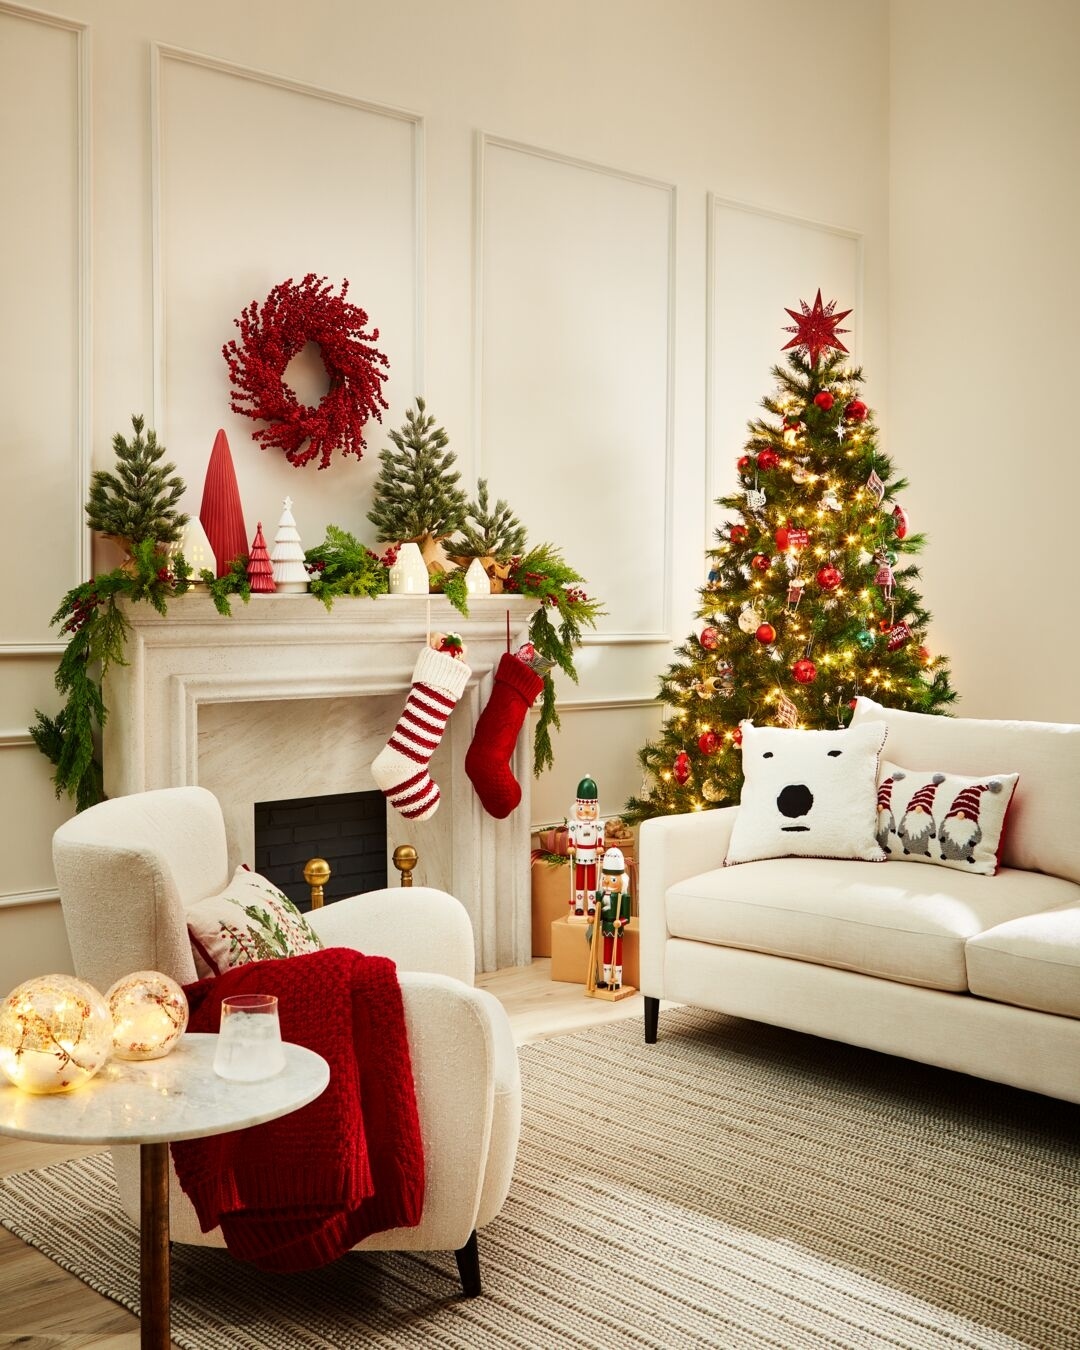 Living room with Christmas tree and other holiday decor.